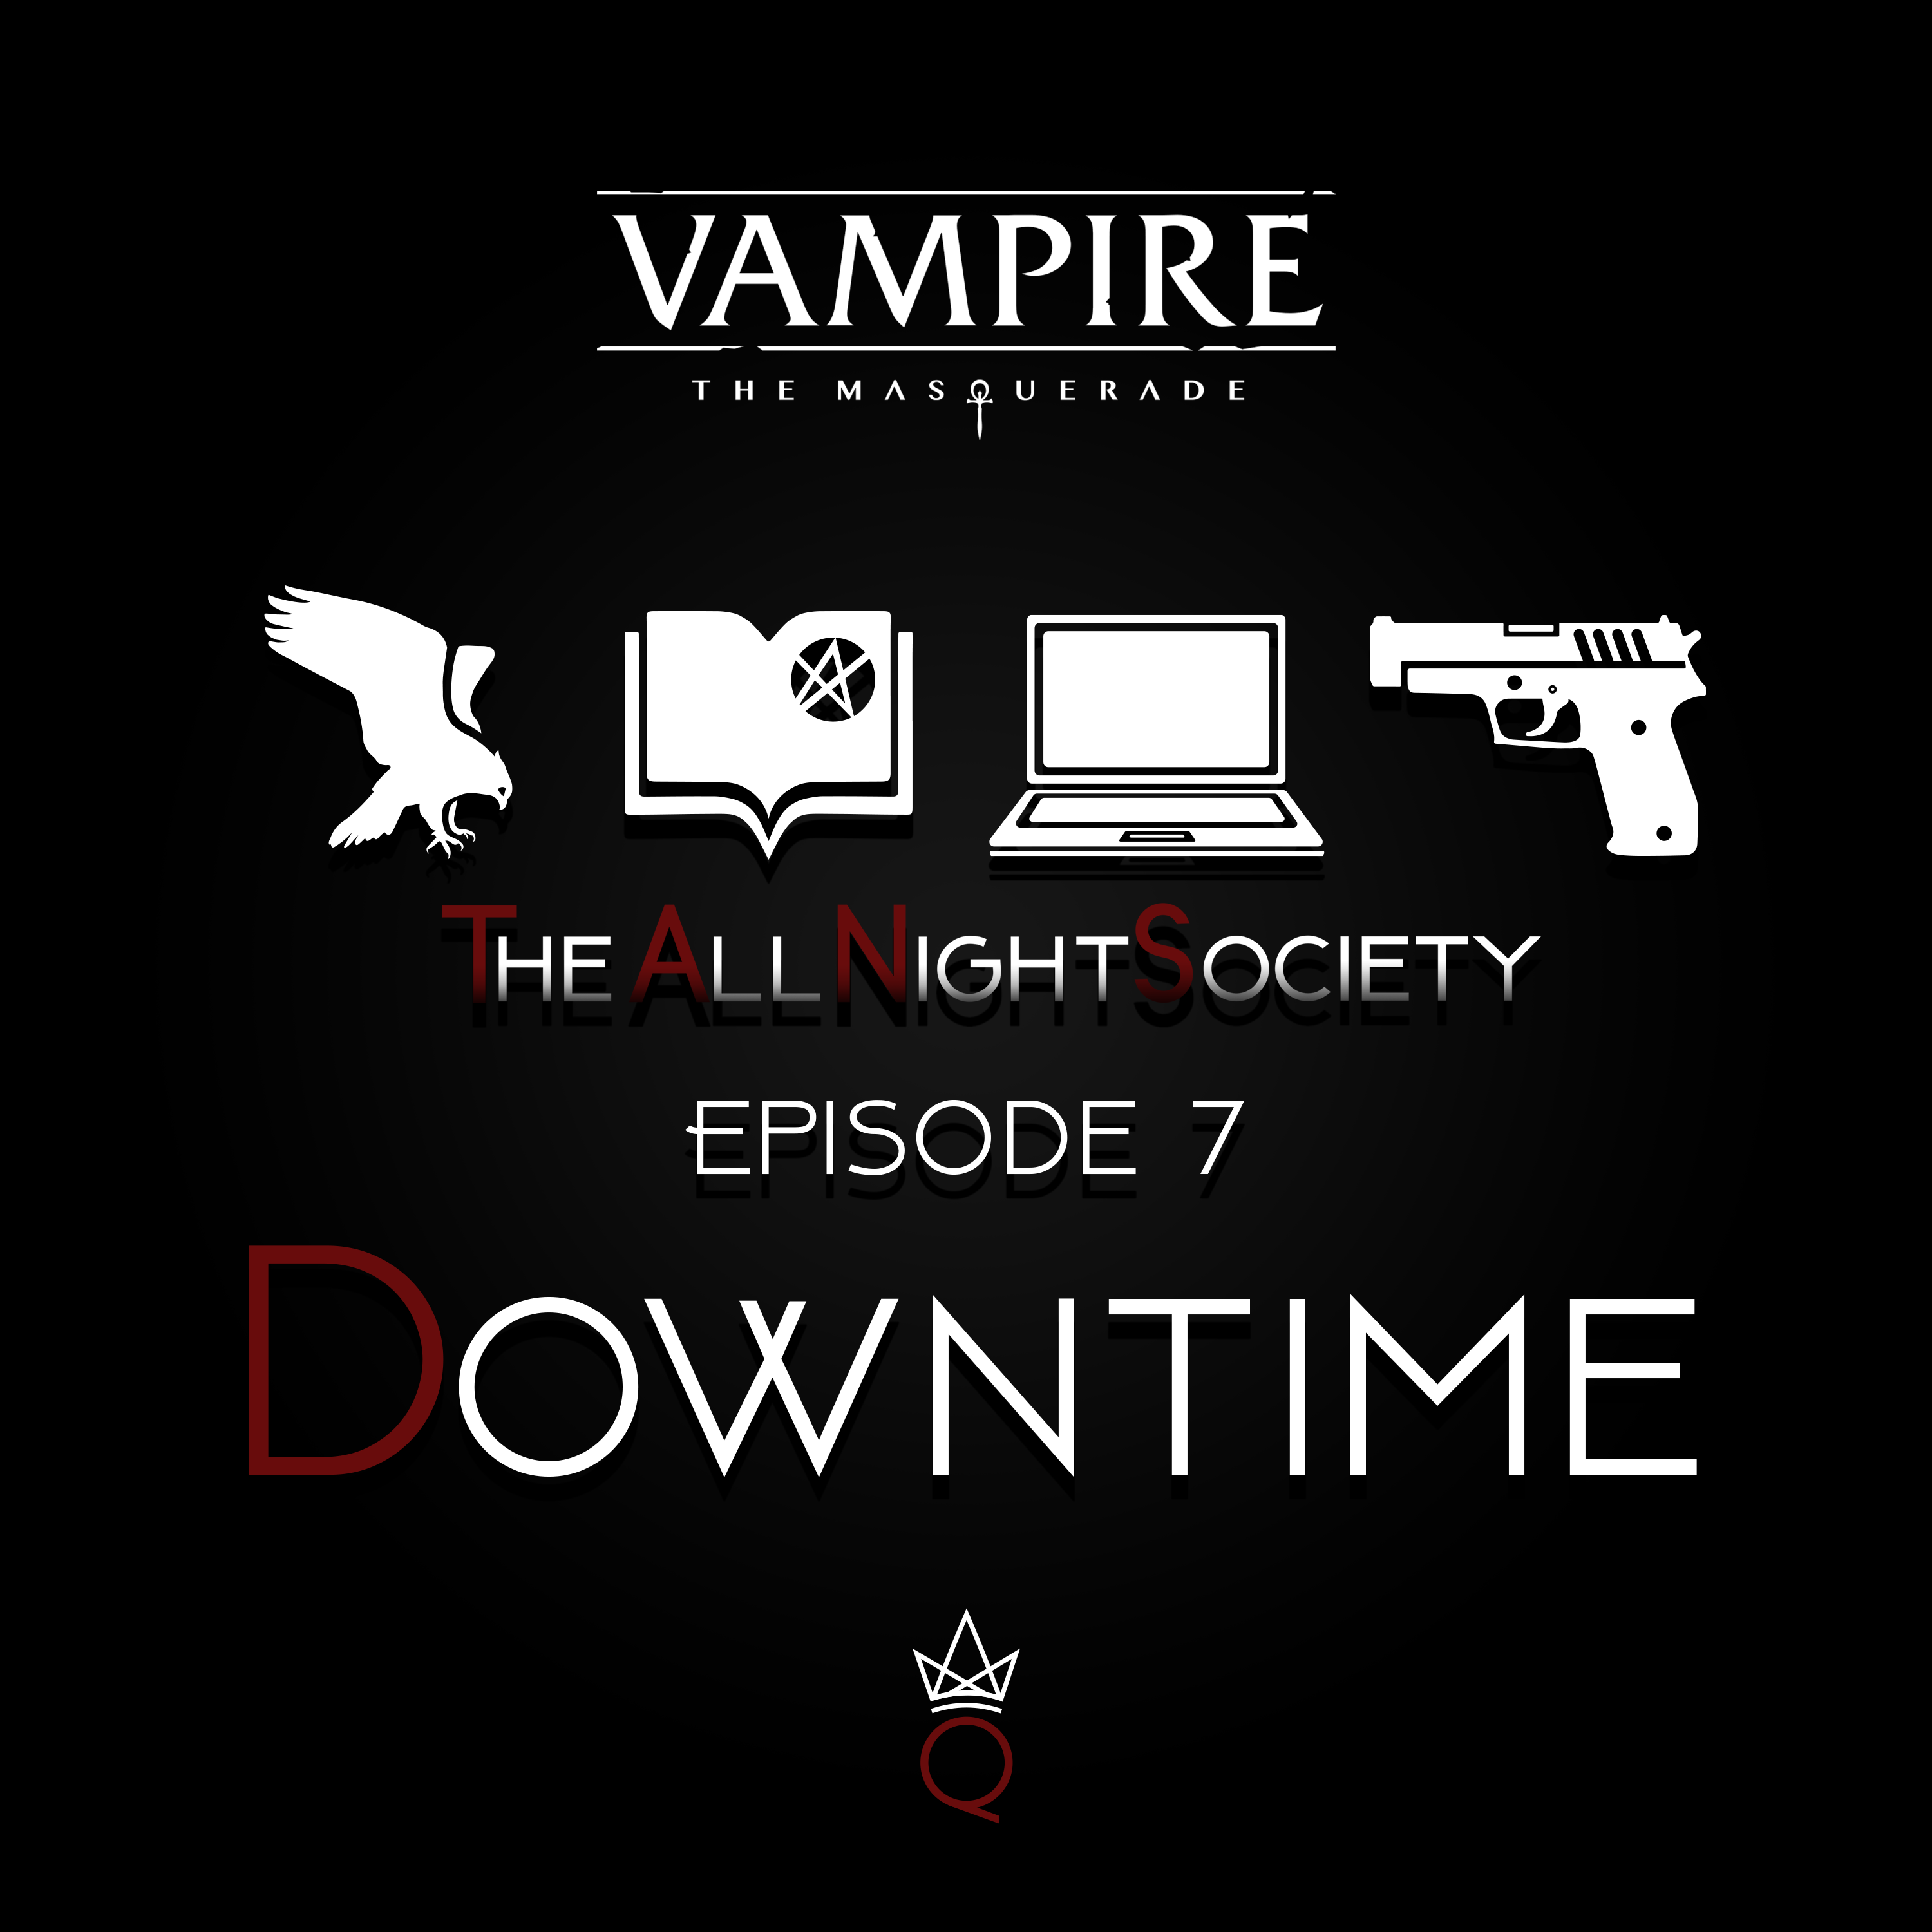 Episode 7 - Downtime